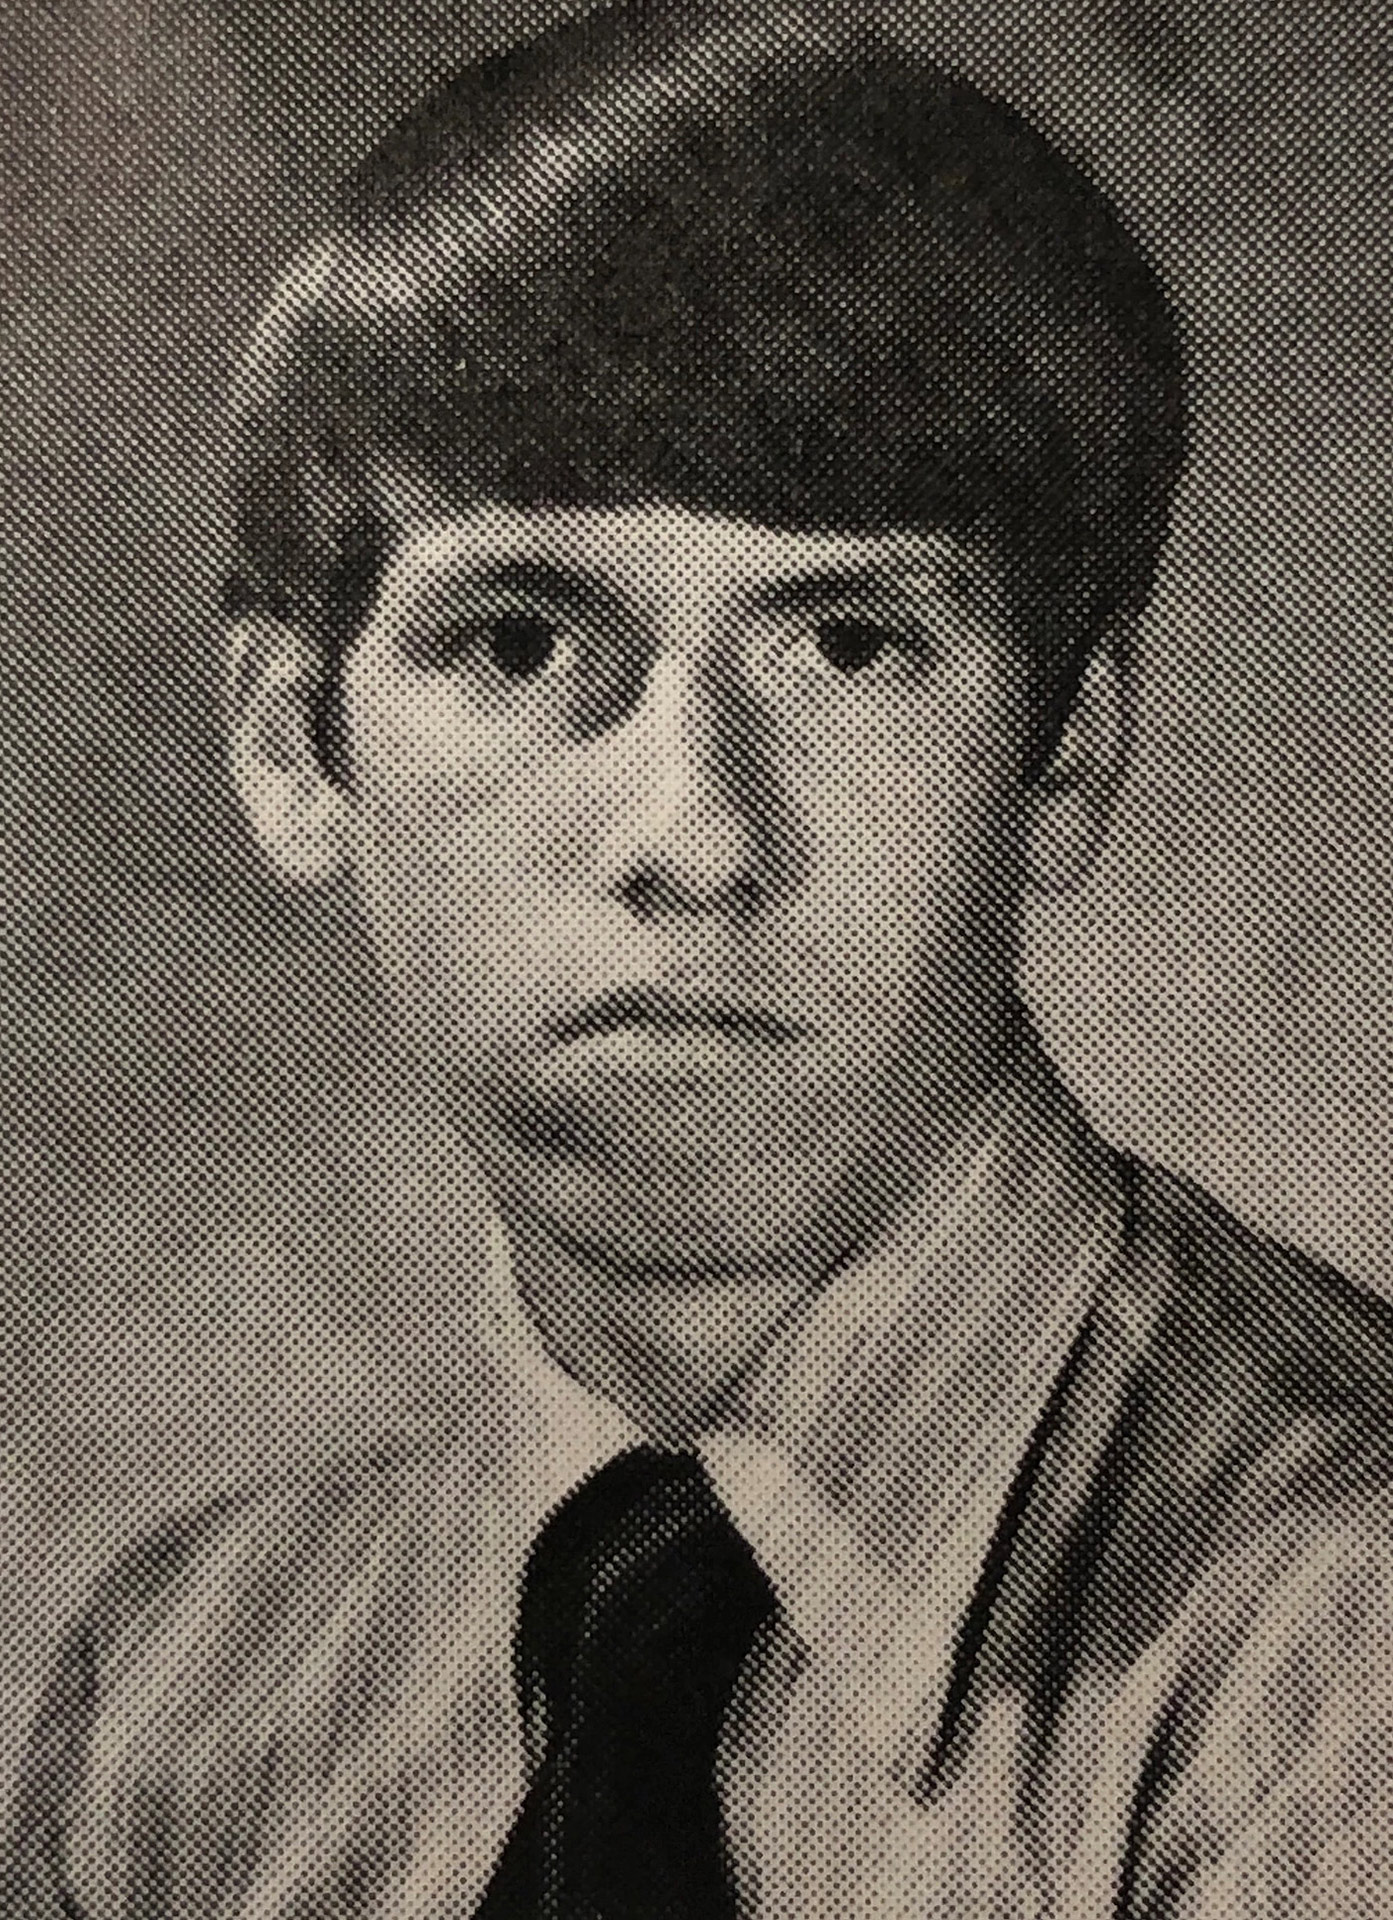 Mississippi novelist Steve Yarbrough in his Indianola class of 1975 picture (courtesy of The Admissions Project Digital Archive)